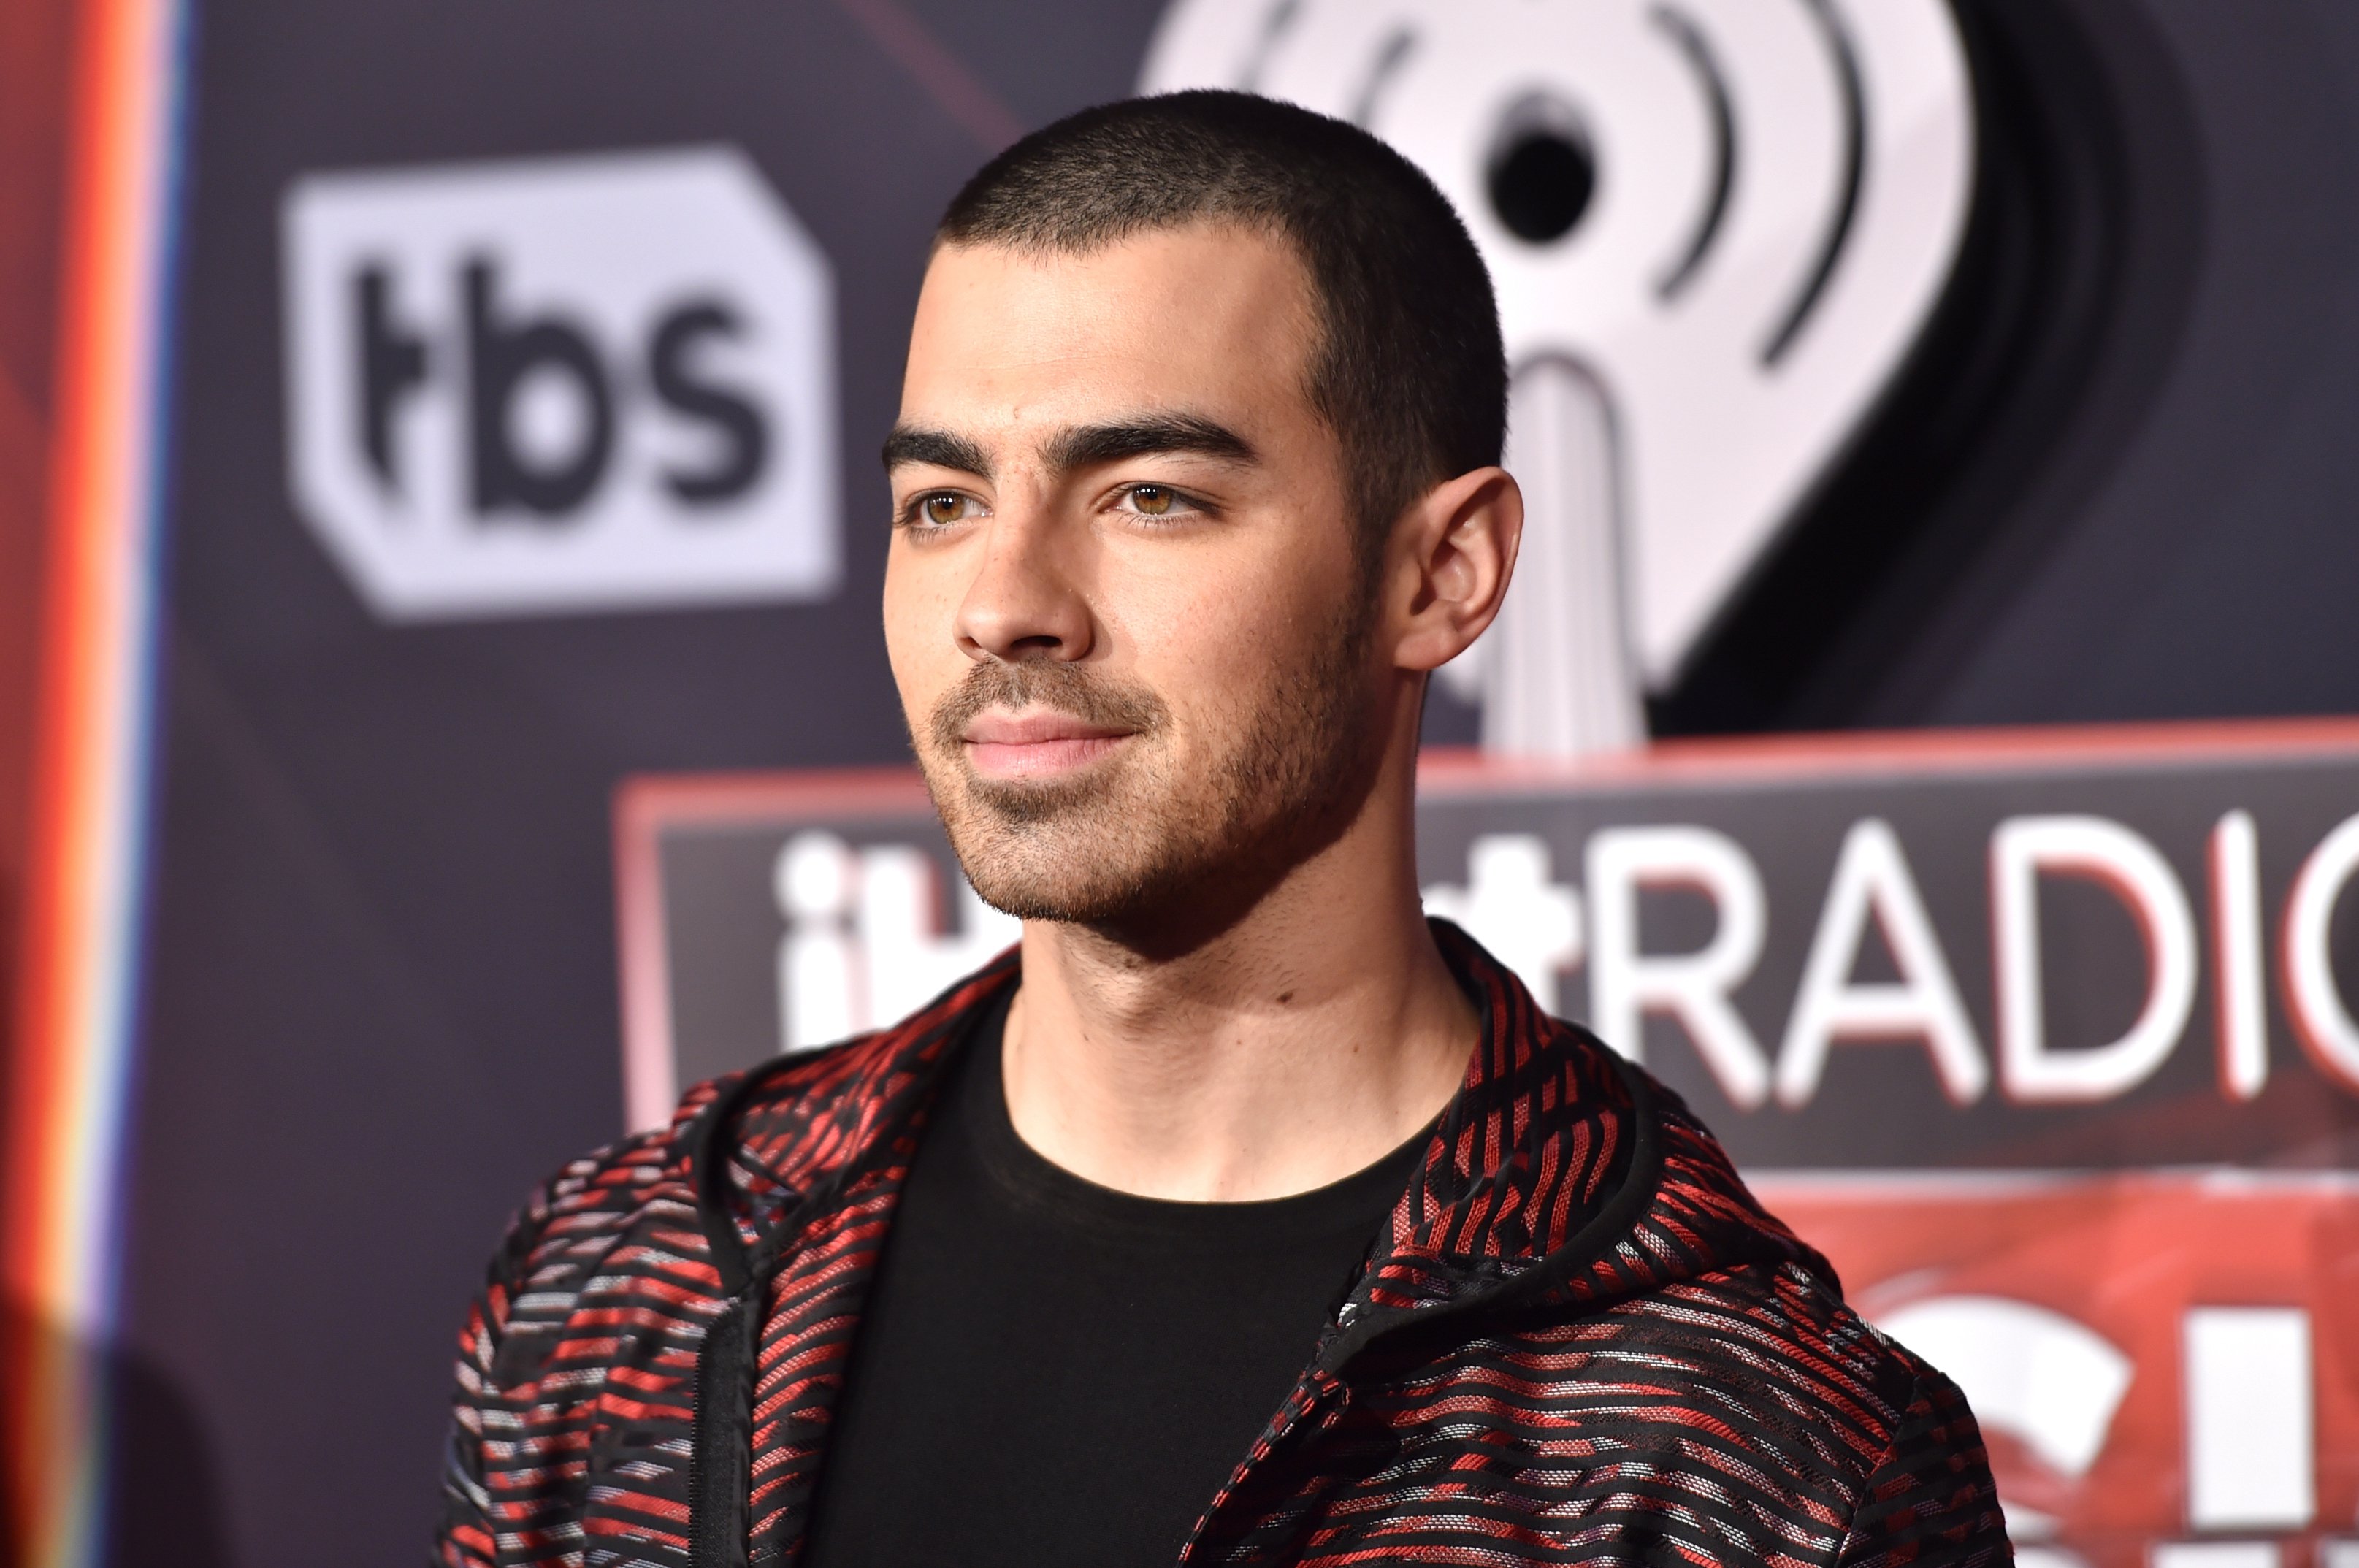 Joe Jonas attends the iHeartRadio Music Awards in Inglewood, California on March 5, 2017 | Photo: Getty Images